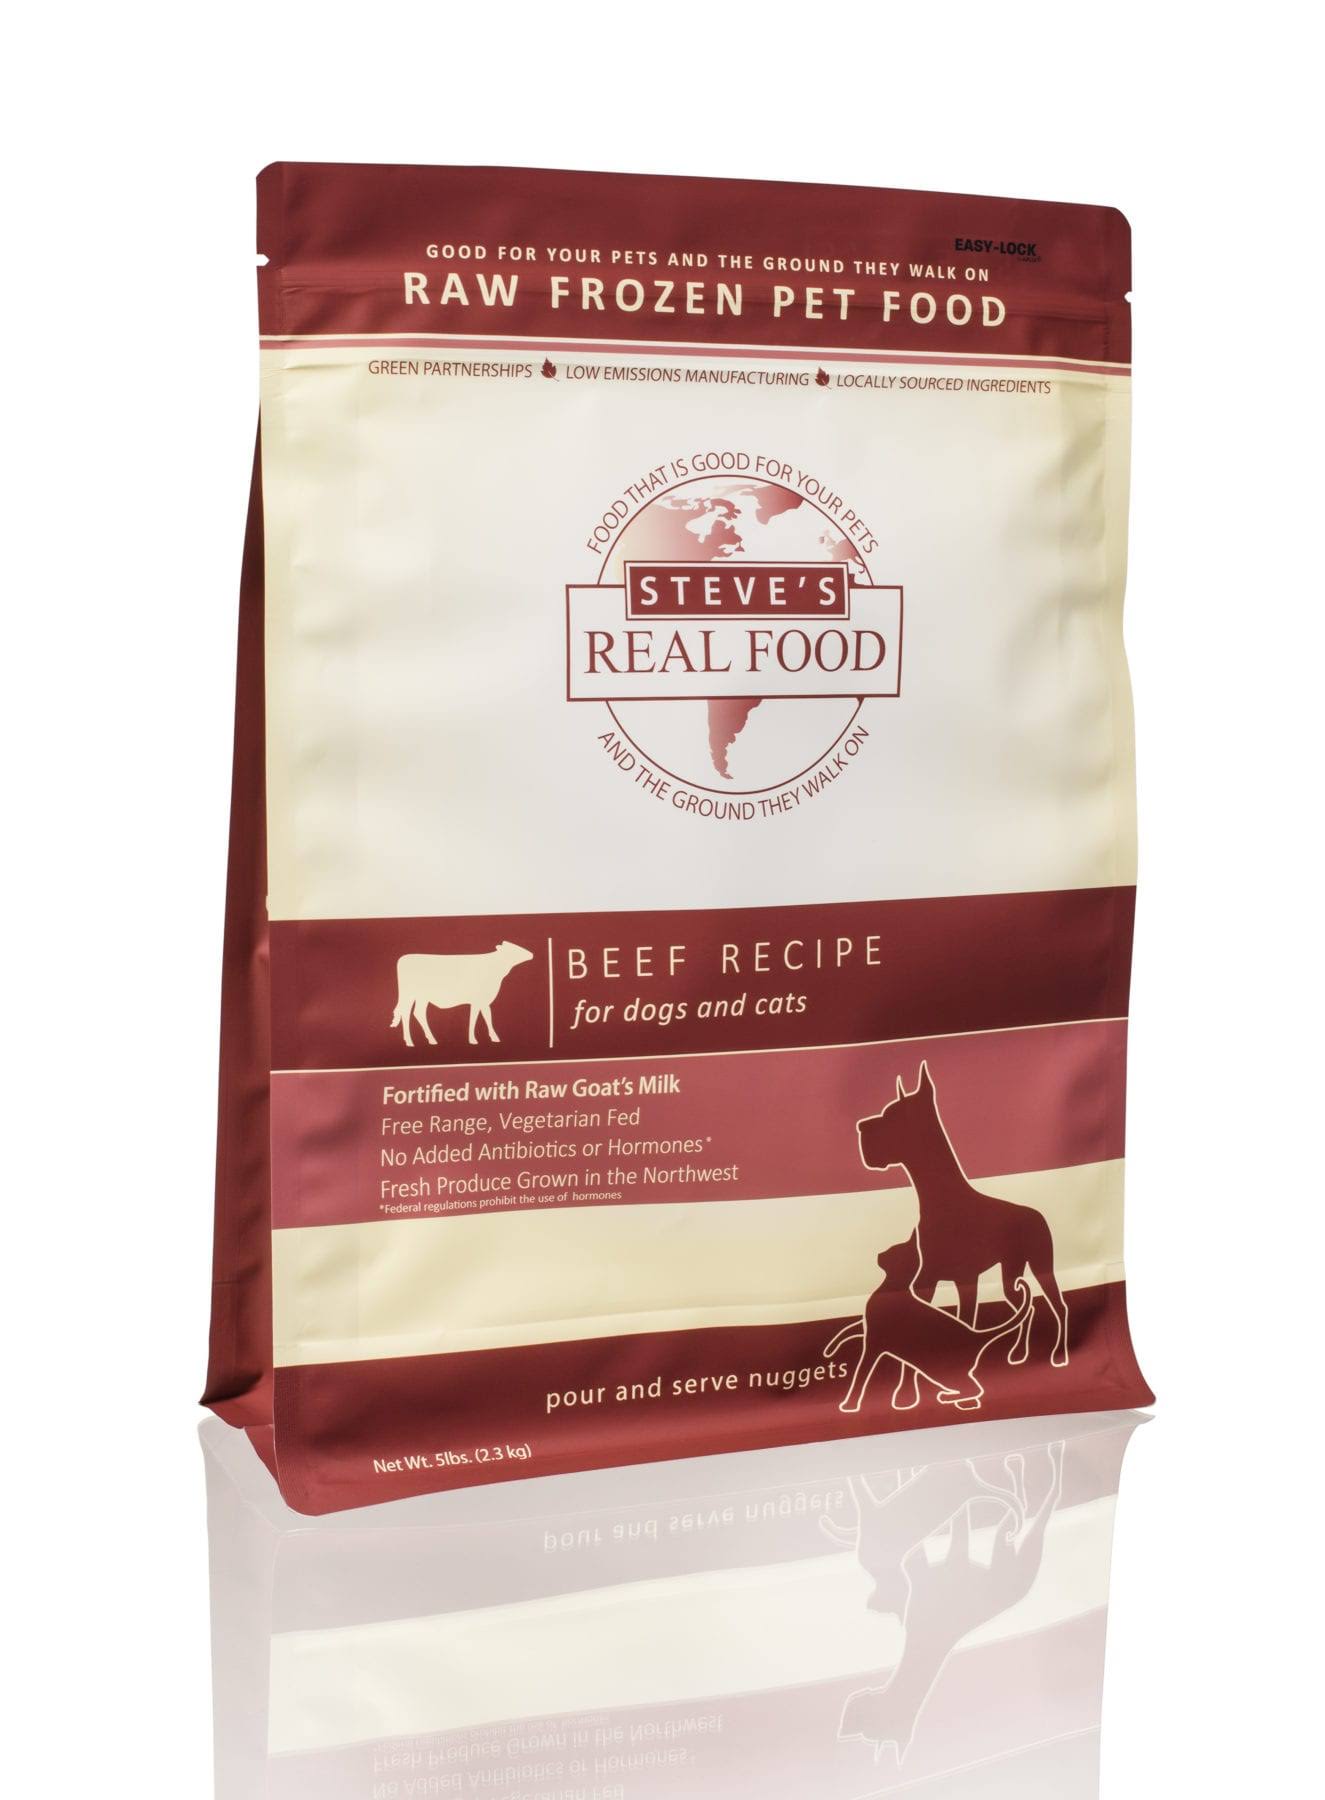 Steve's Real Food Raw Frozen Canine Recipe - Beef, 5lb